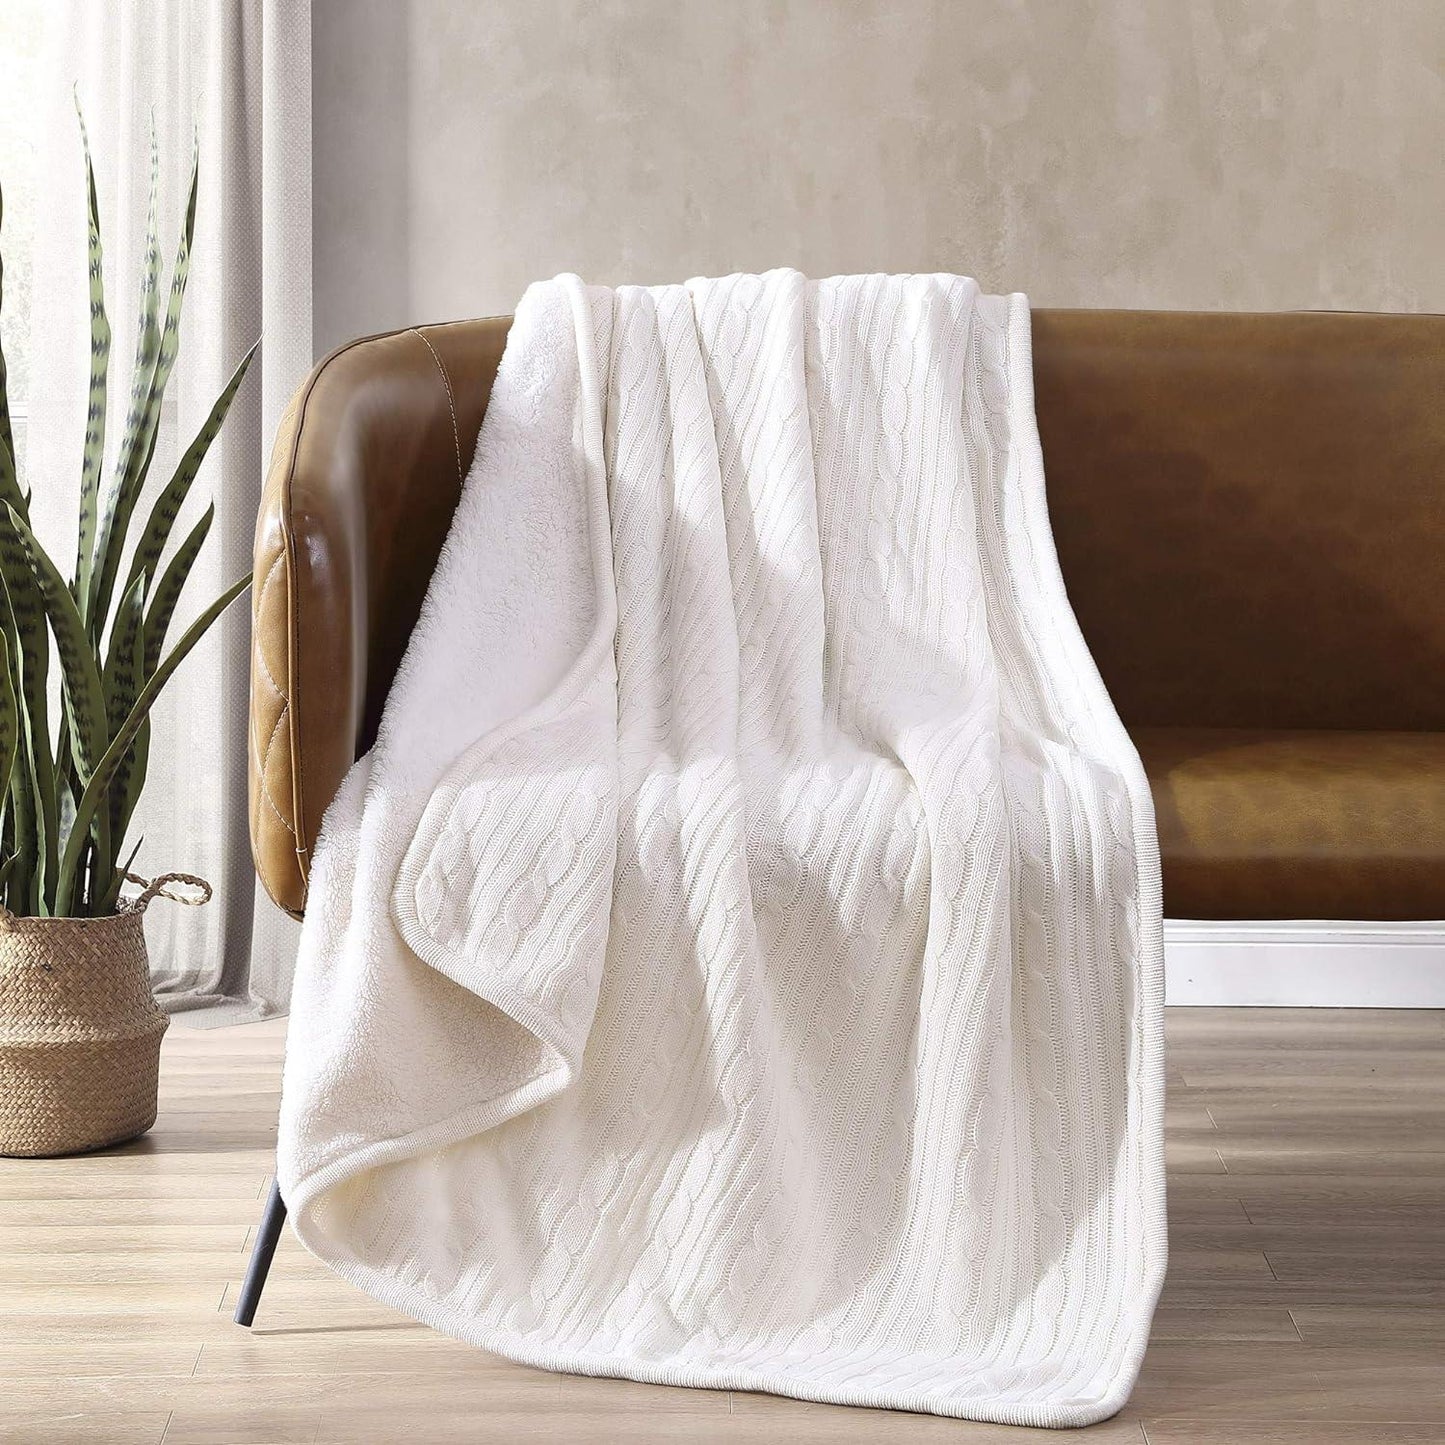 Brielle Home Cozy Cable Knit Throw Blanket - All Season Chic Thick Sweater Knitting for Couch Sofa Bed with Soft Sherpa Lining, Ivory